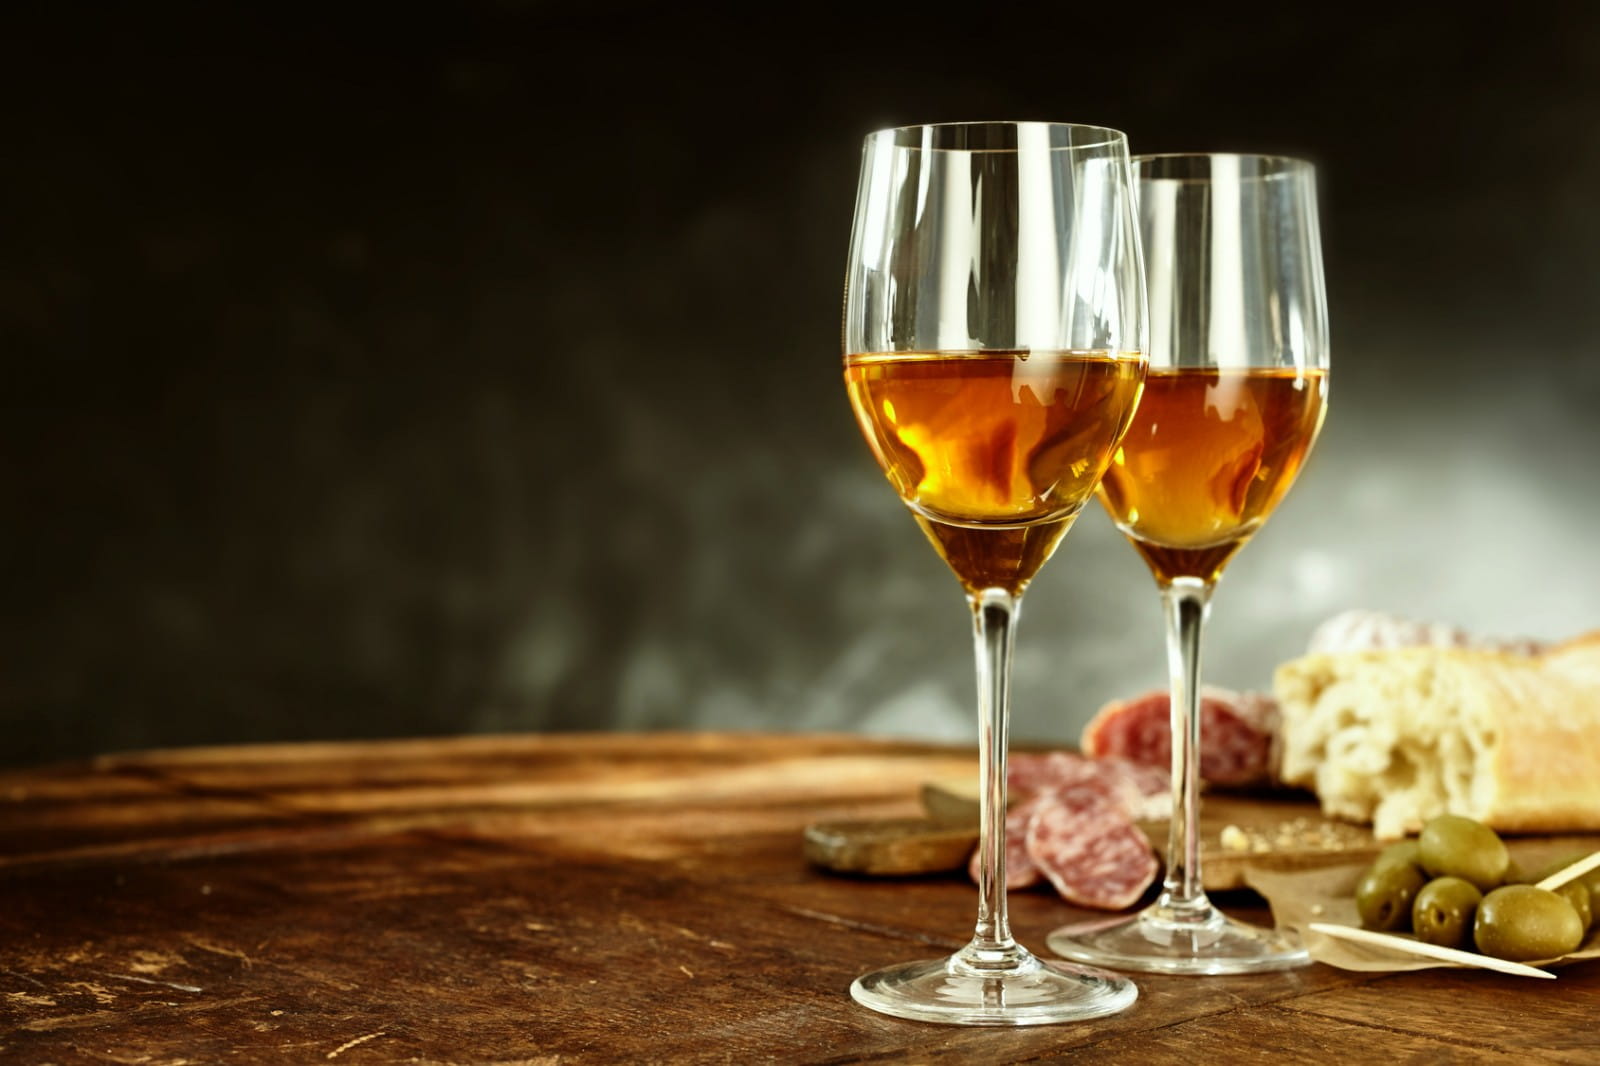 The best pairings for amontillado and palo cortado sherry